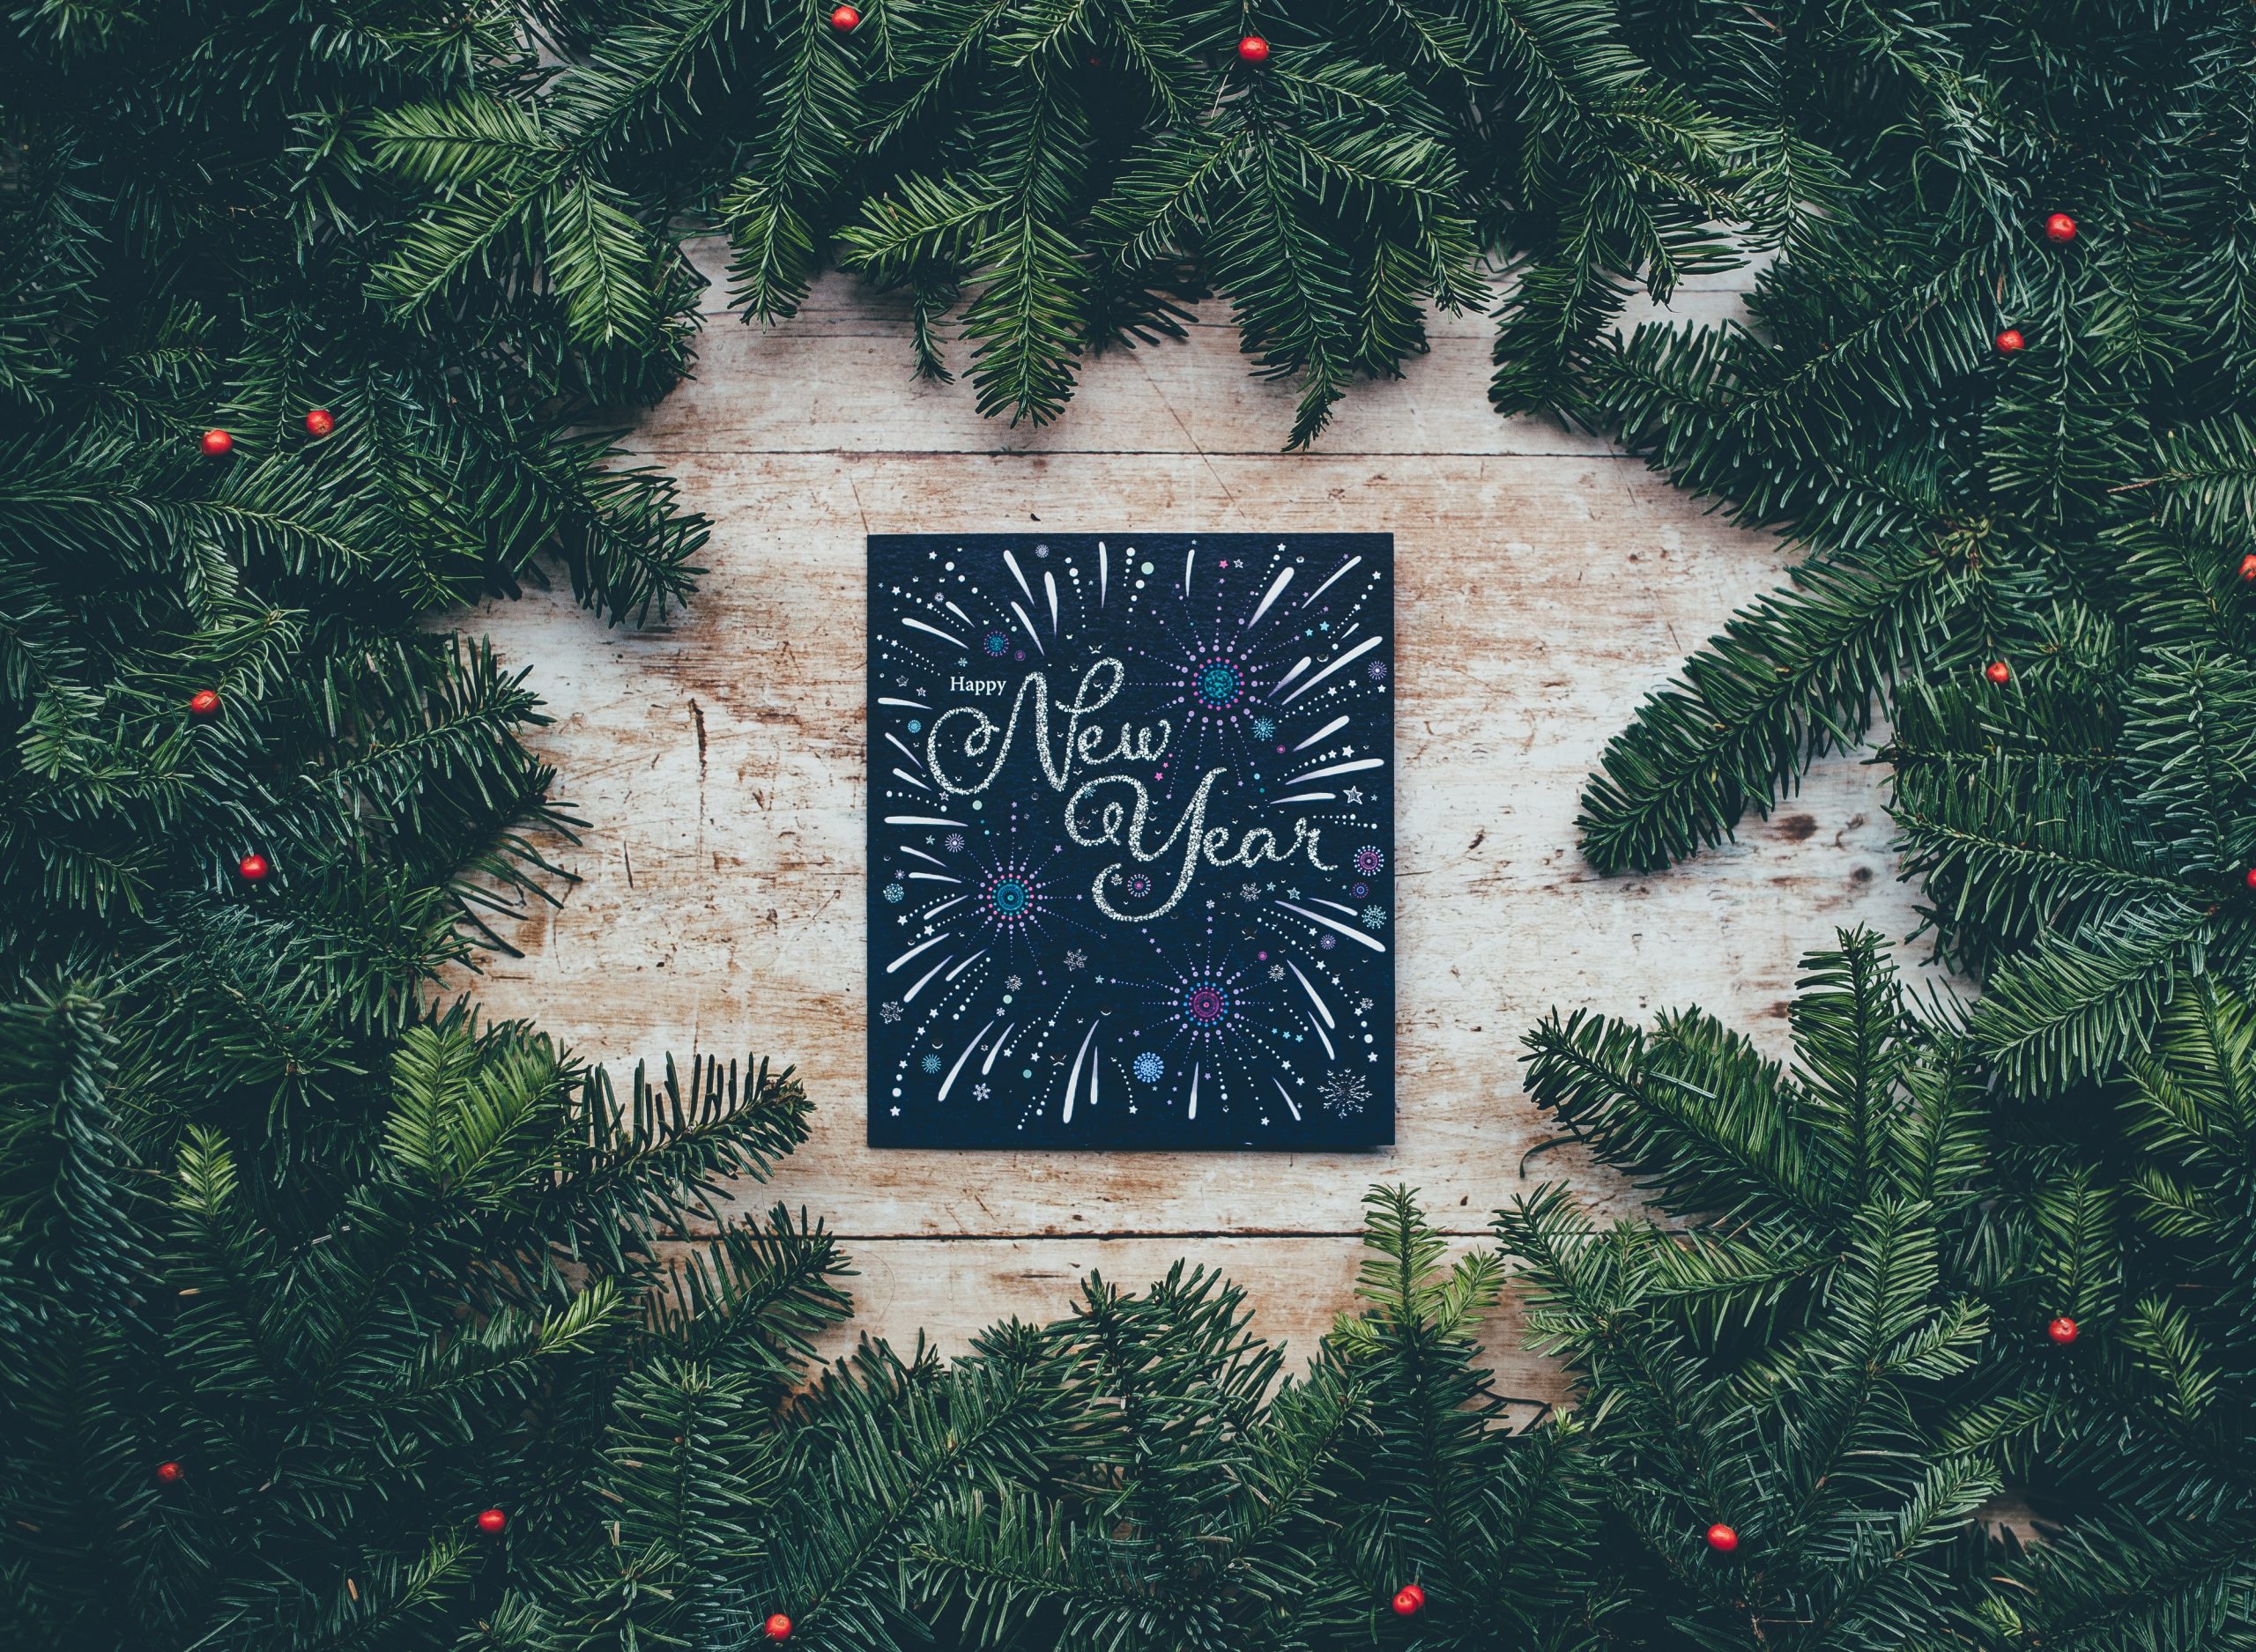 A black card with "Happy New Year" written in elegant cursive sits on a wooden surface, surrounded by a wreath of evergreen branches adorned with small red berries. The card features a firework design in the background, bringing warmth and hope akin to mental health treatment's uplifting spirit.